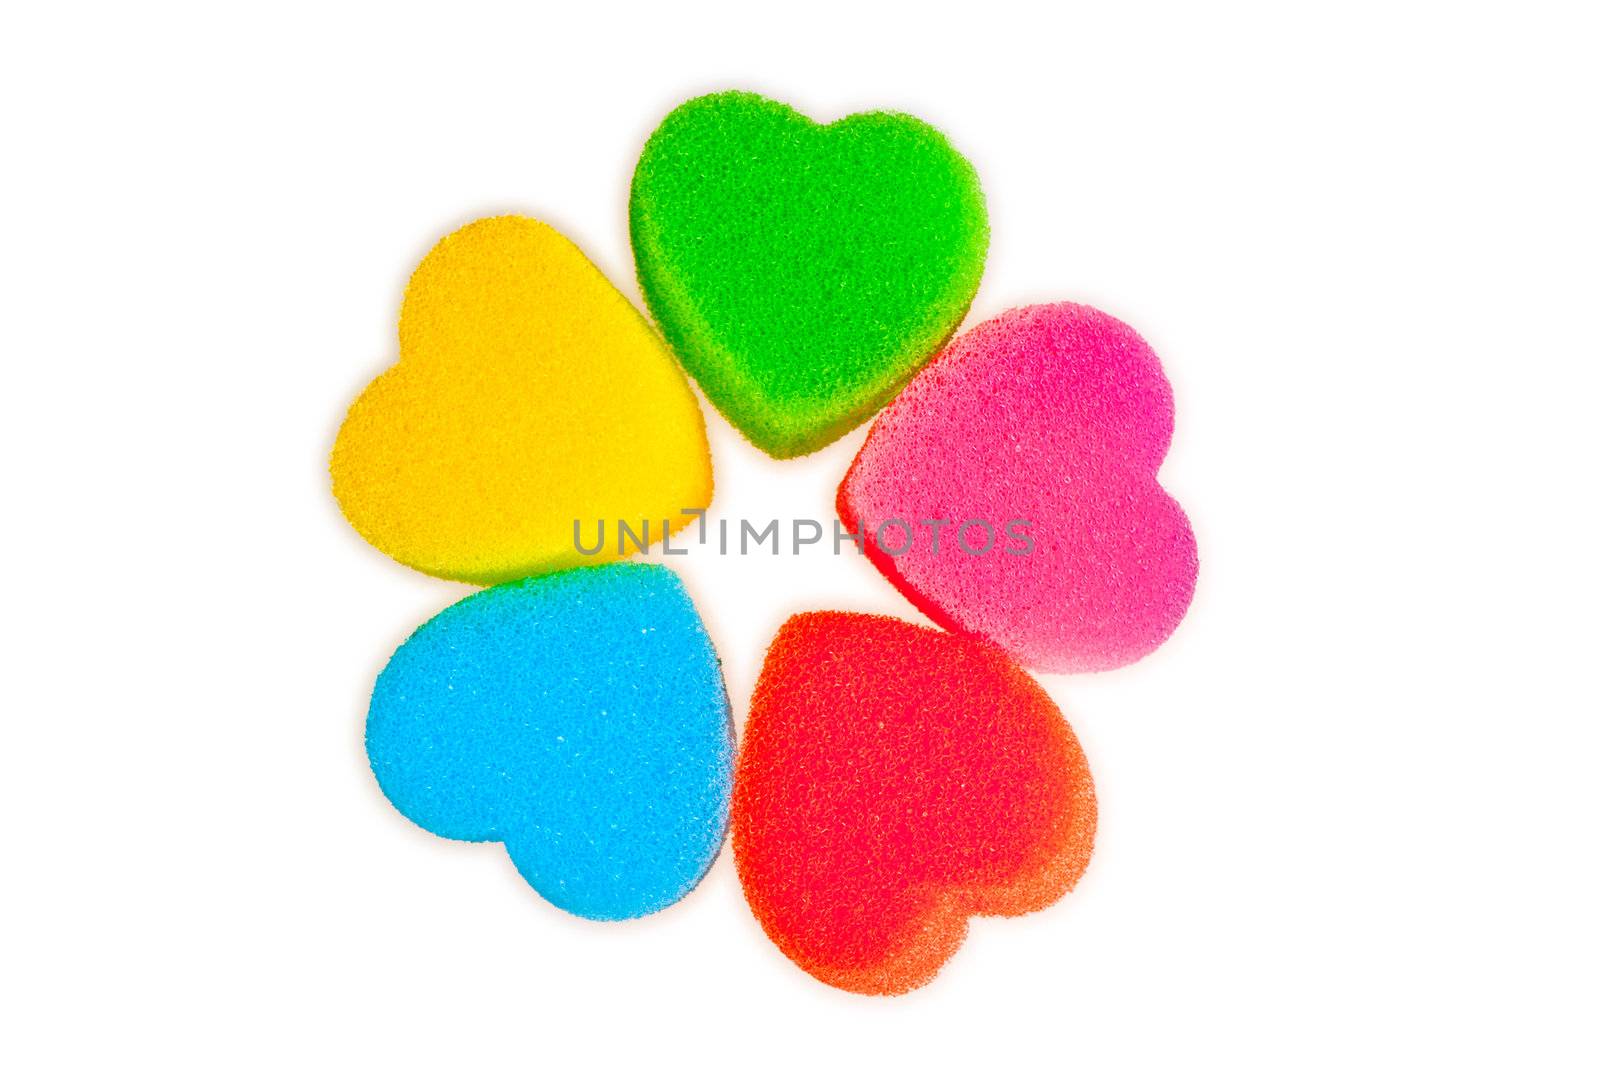 Flower of colored hearts on white